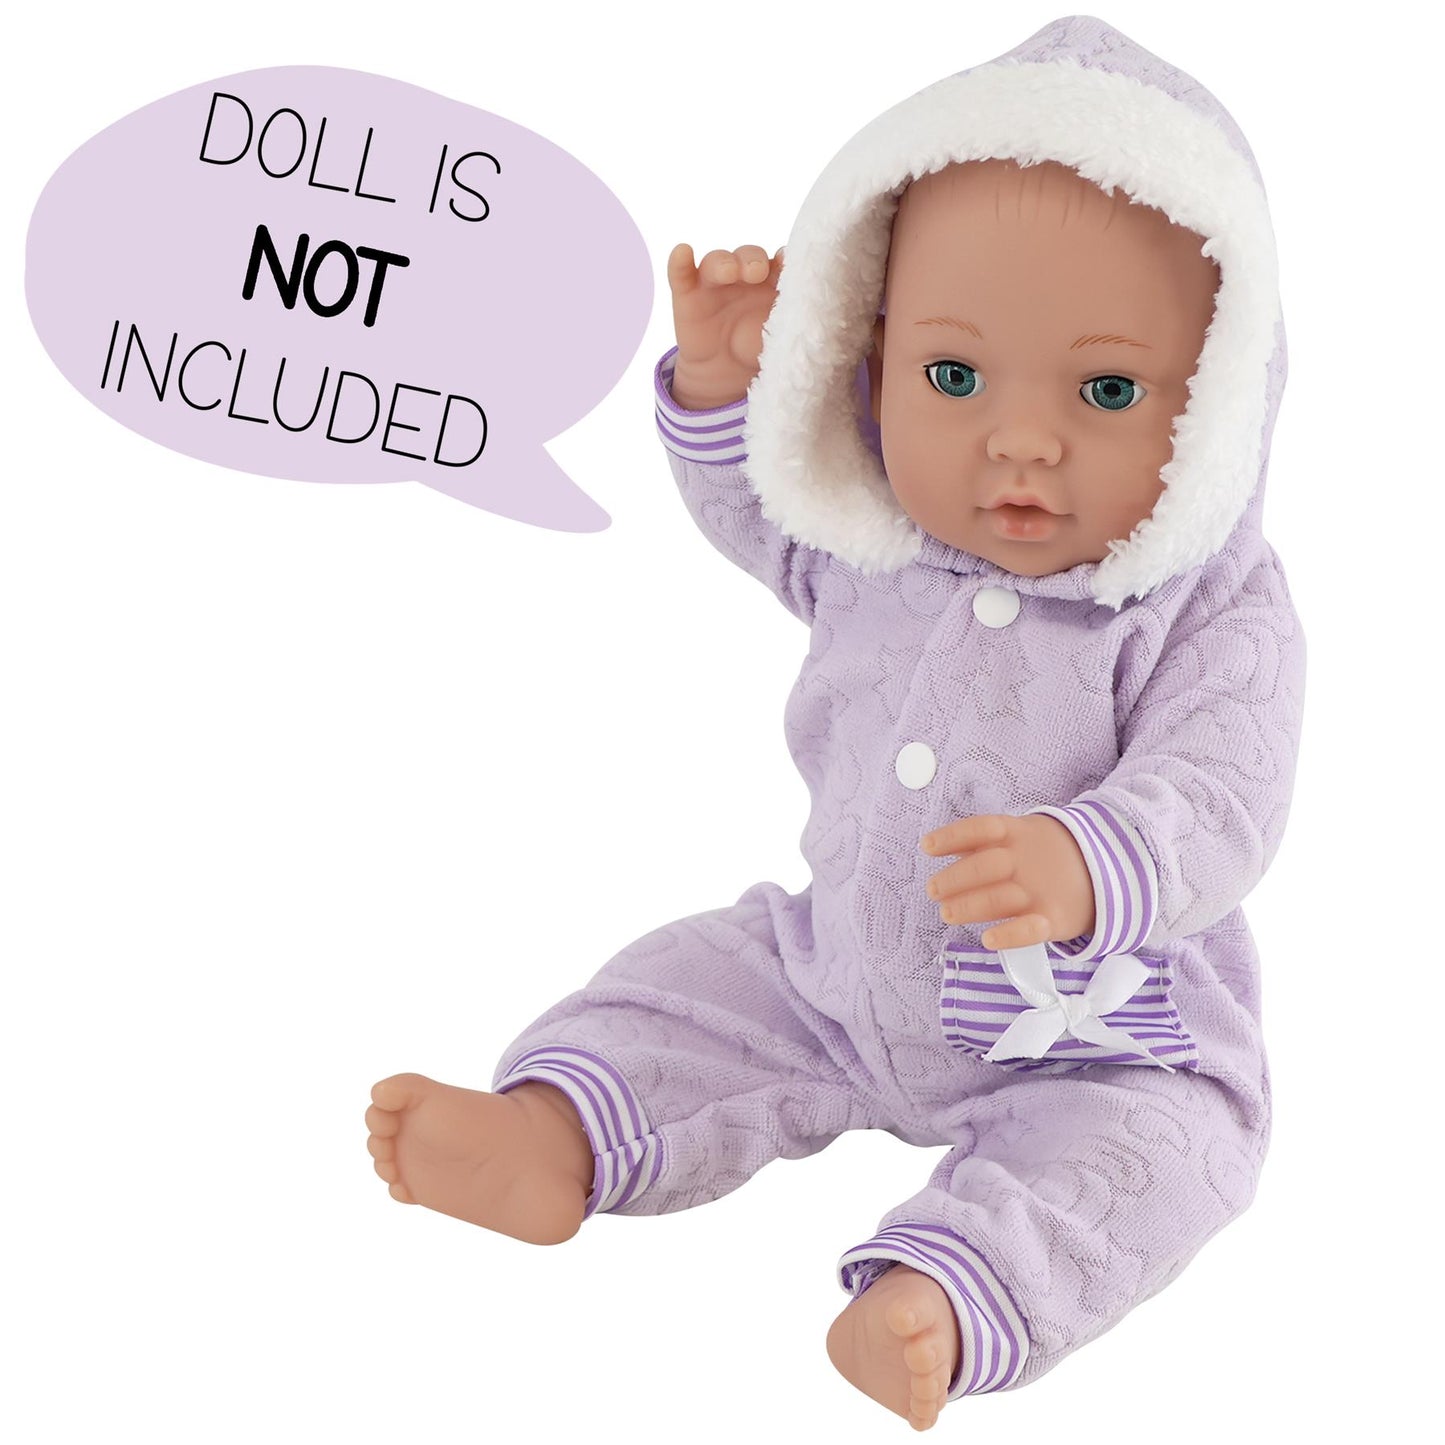 Baby Doll Set of 6 Outfits 12-16" by BiBi Doll - UKBuyZone